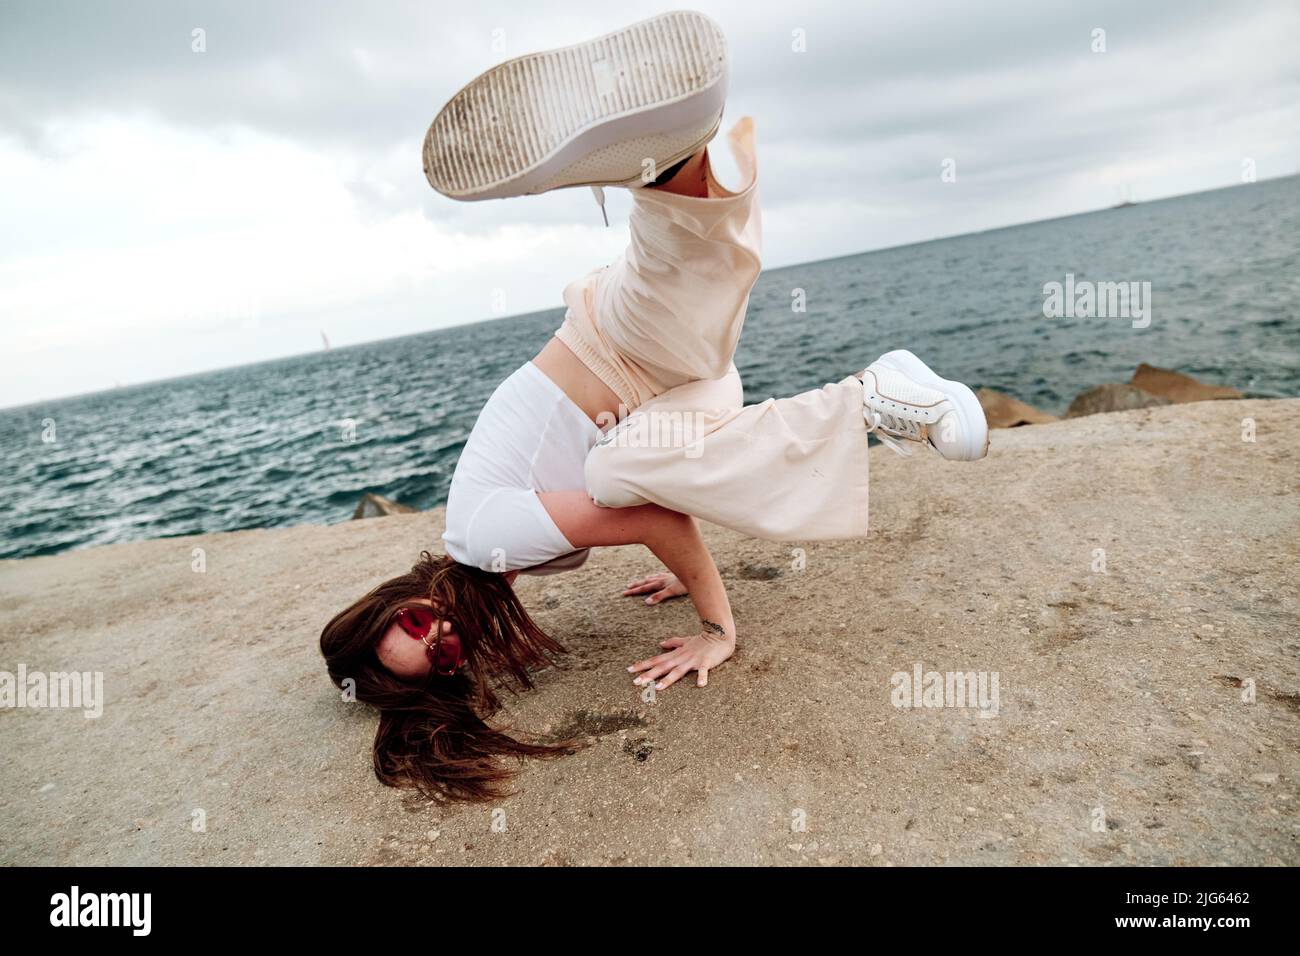 Female dancer doing handstand while breakdancing outdoors against sea. Stock Photo